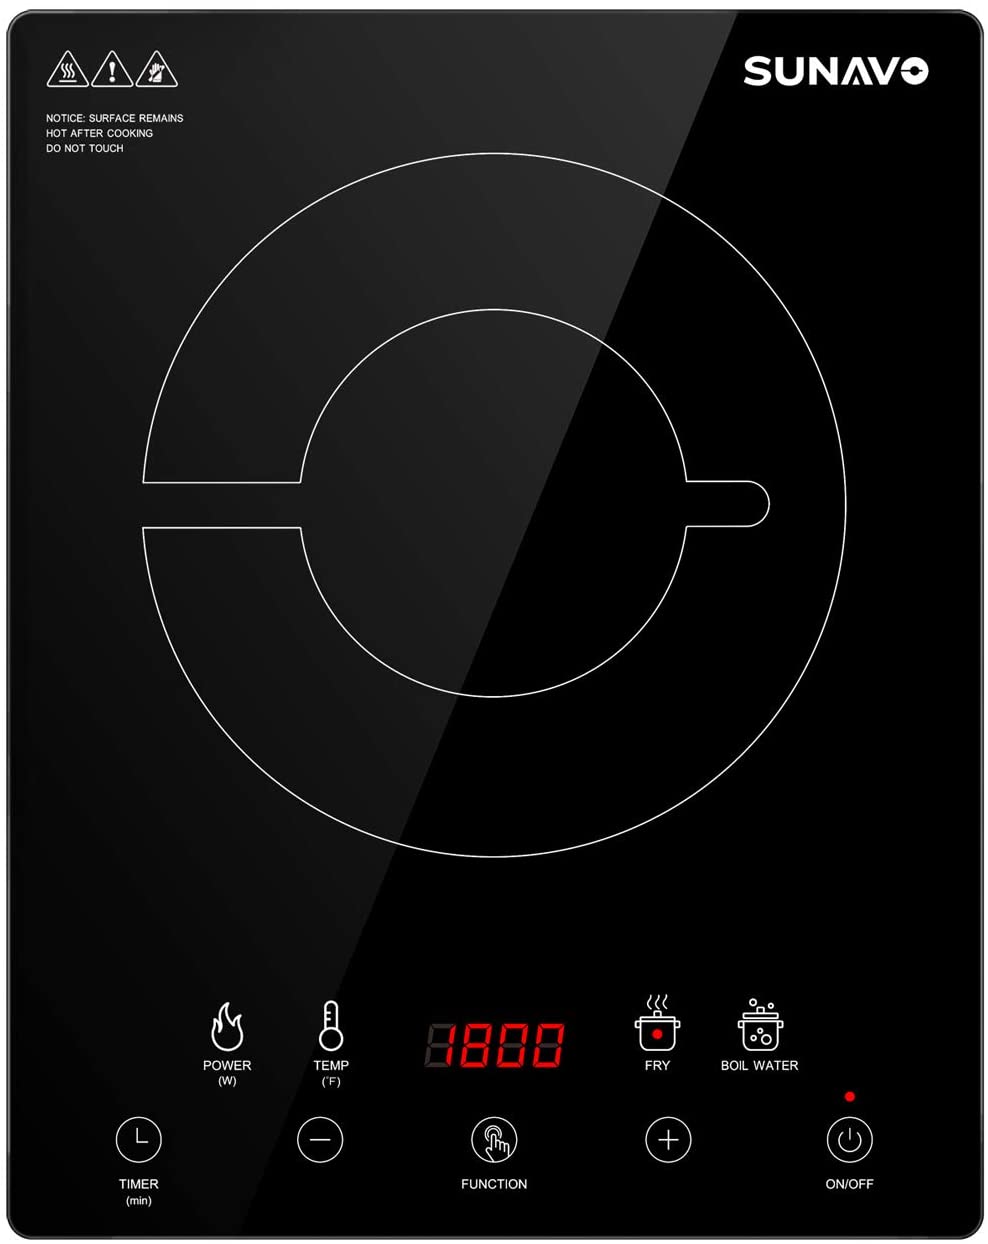 7. SUNAVO Portable Induction Cooktop